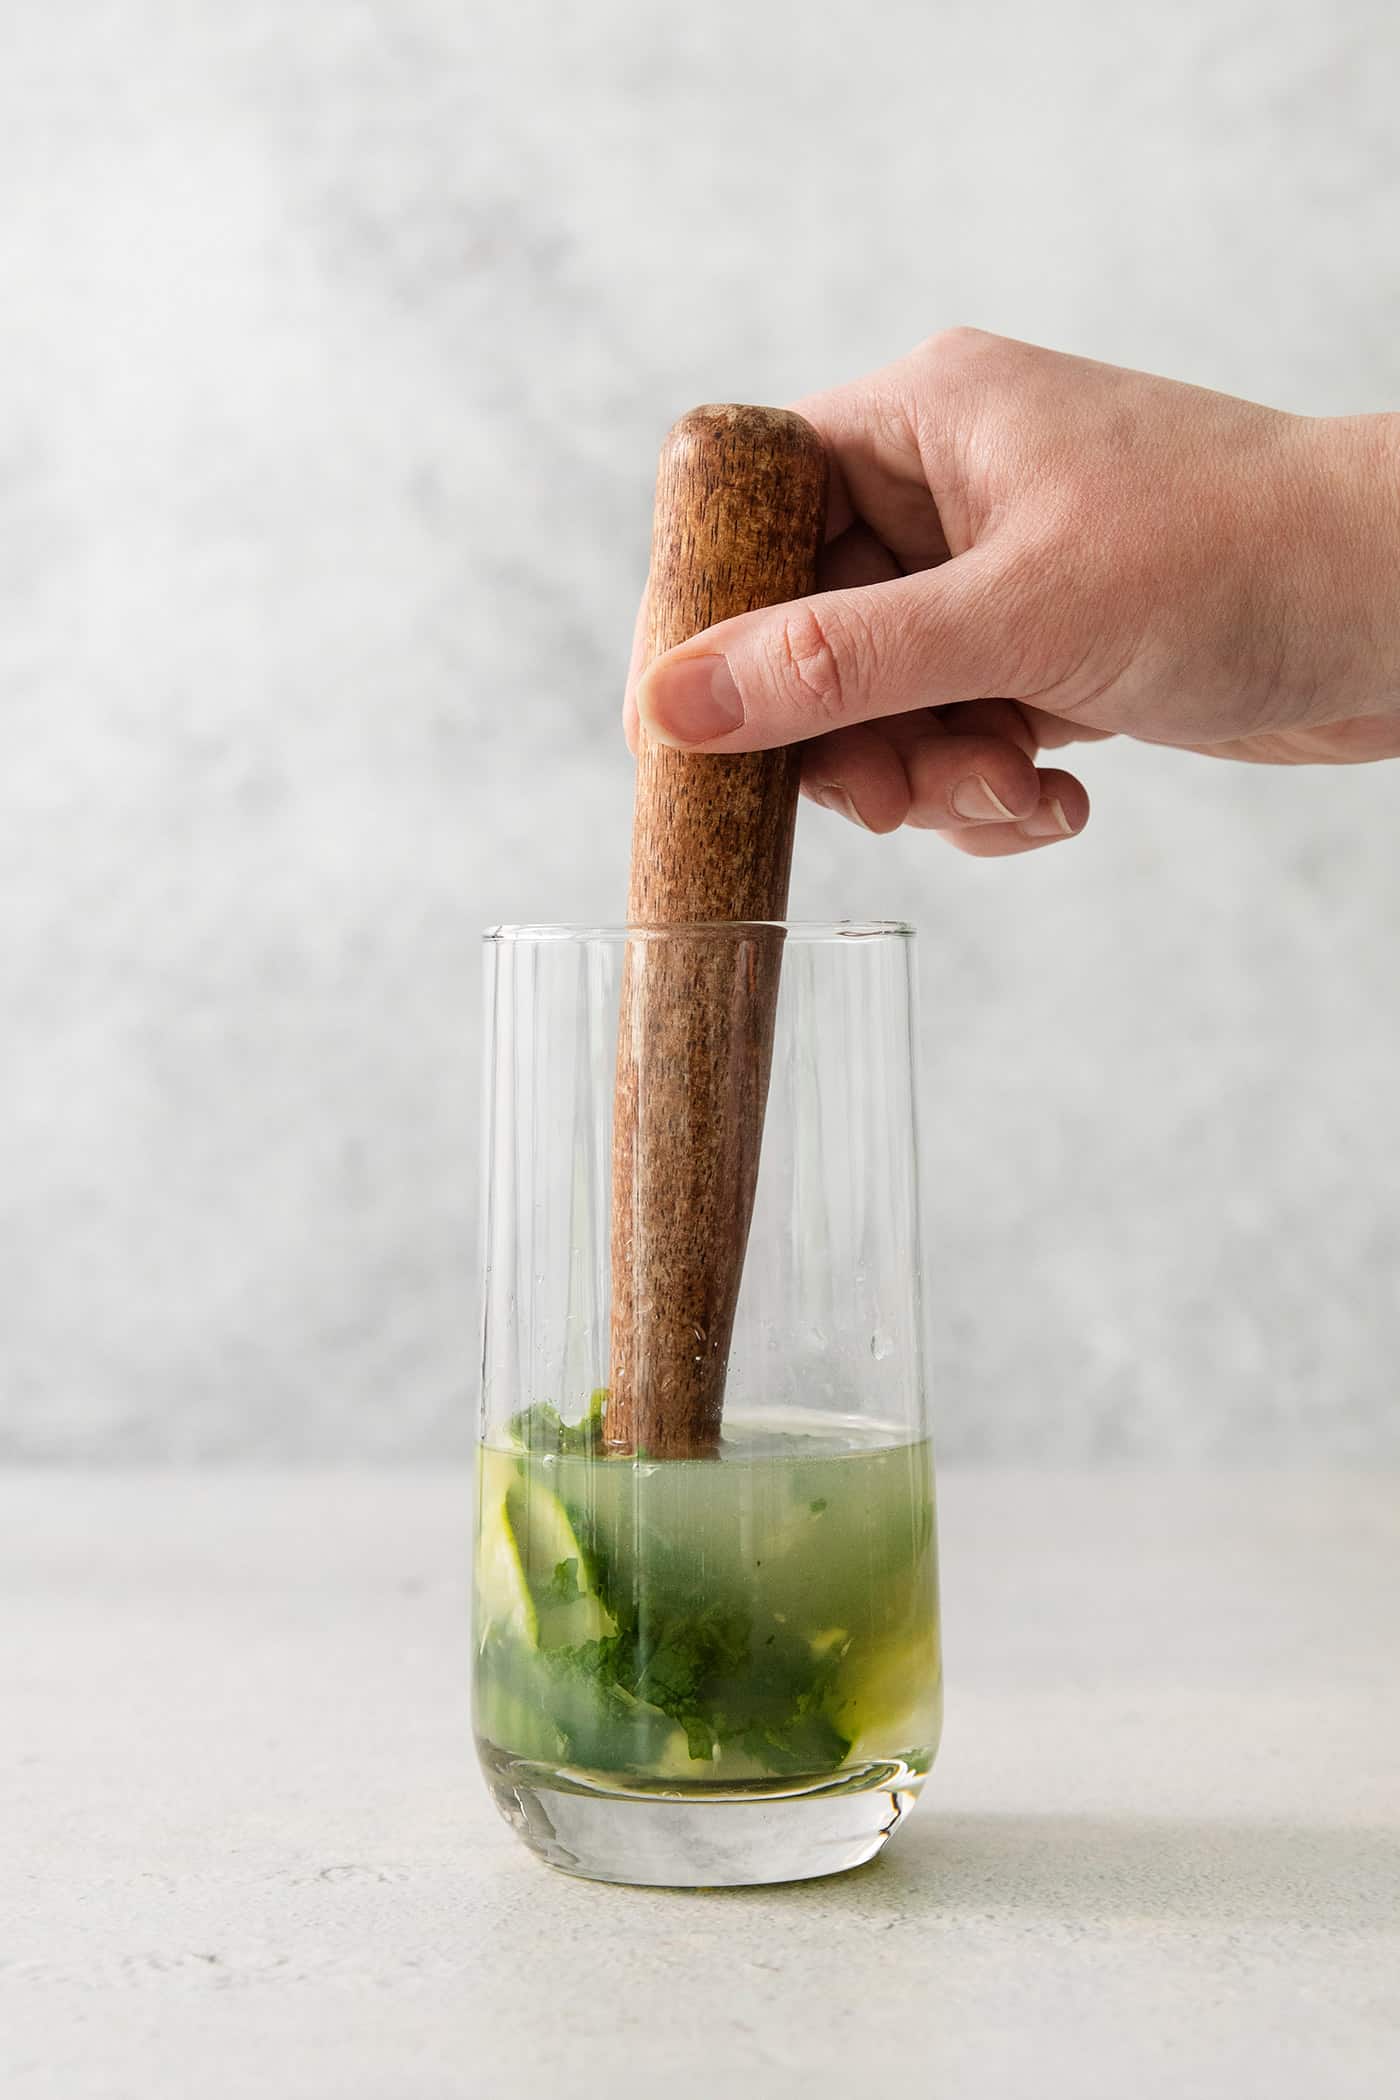 A hand uses a wooden pestle to muddle ingredients for a cucumber mojito.